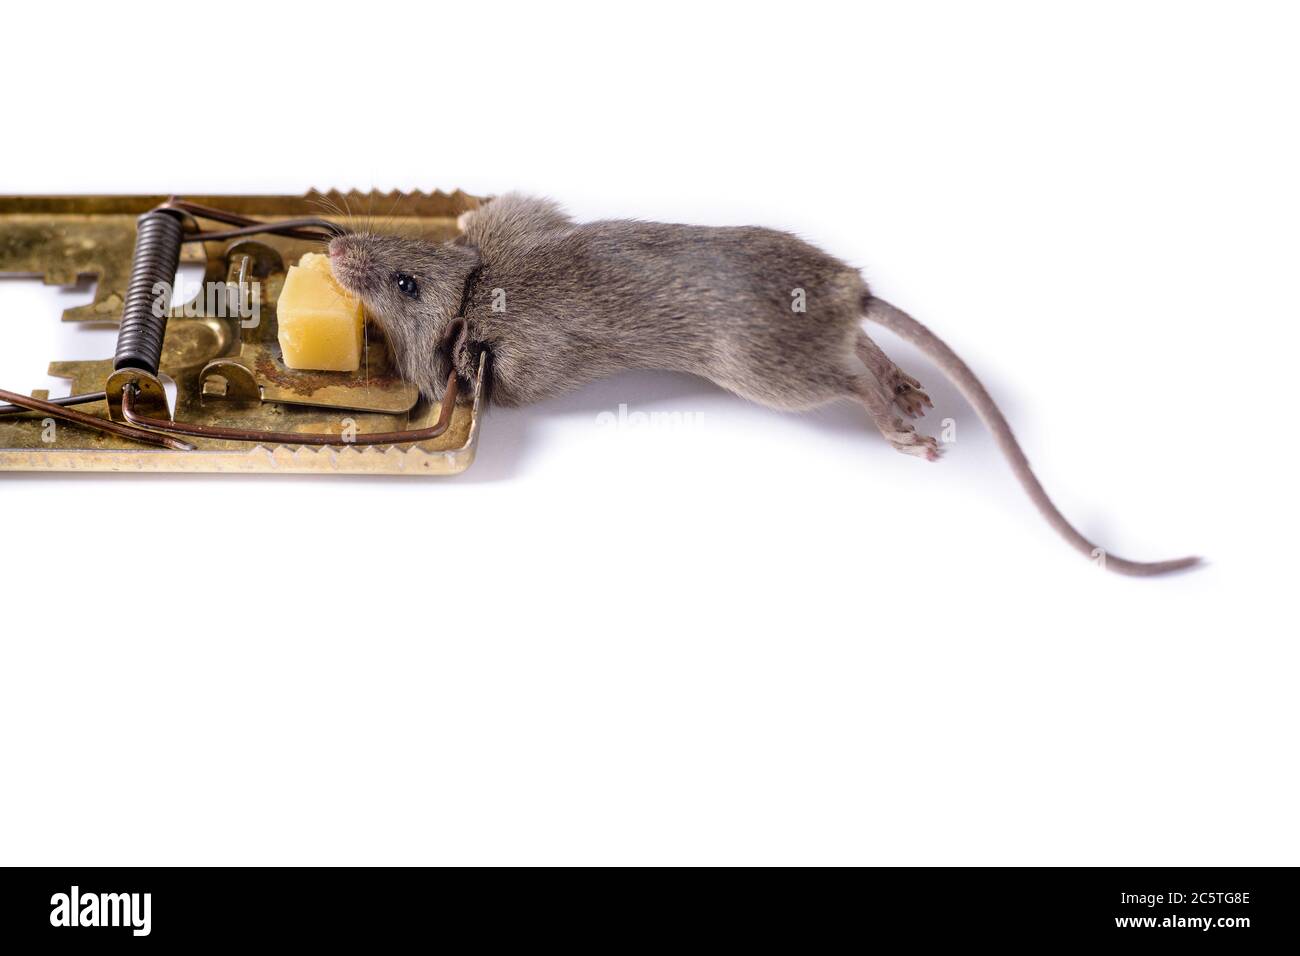 https://c8.alamy.com/comp/2C5TG8E/mousetrap-with-a-piece-of-cheese-on-a-white-background-which-caught-a-gray-mouse-2C5TG8E.jpg